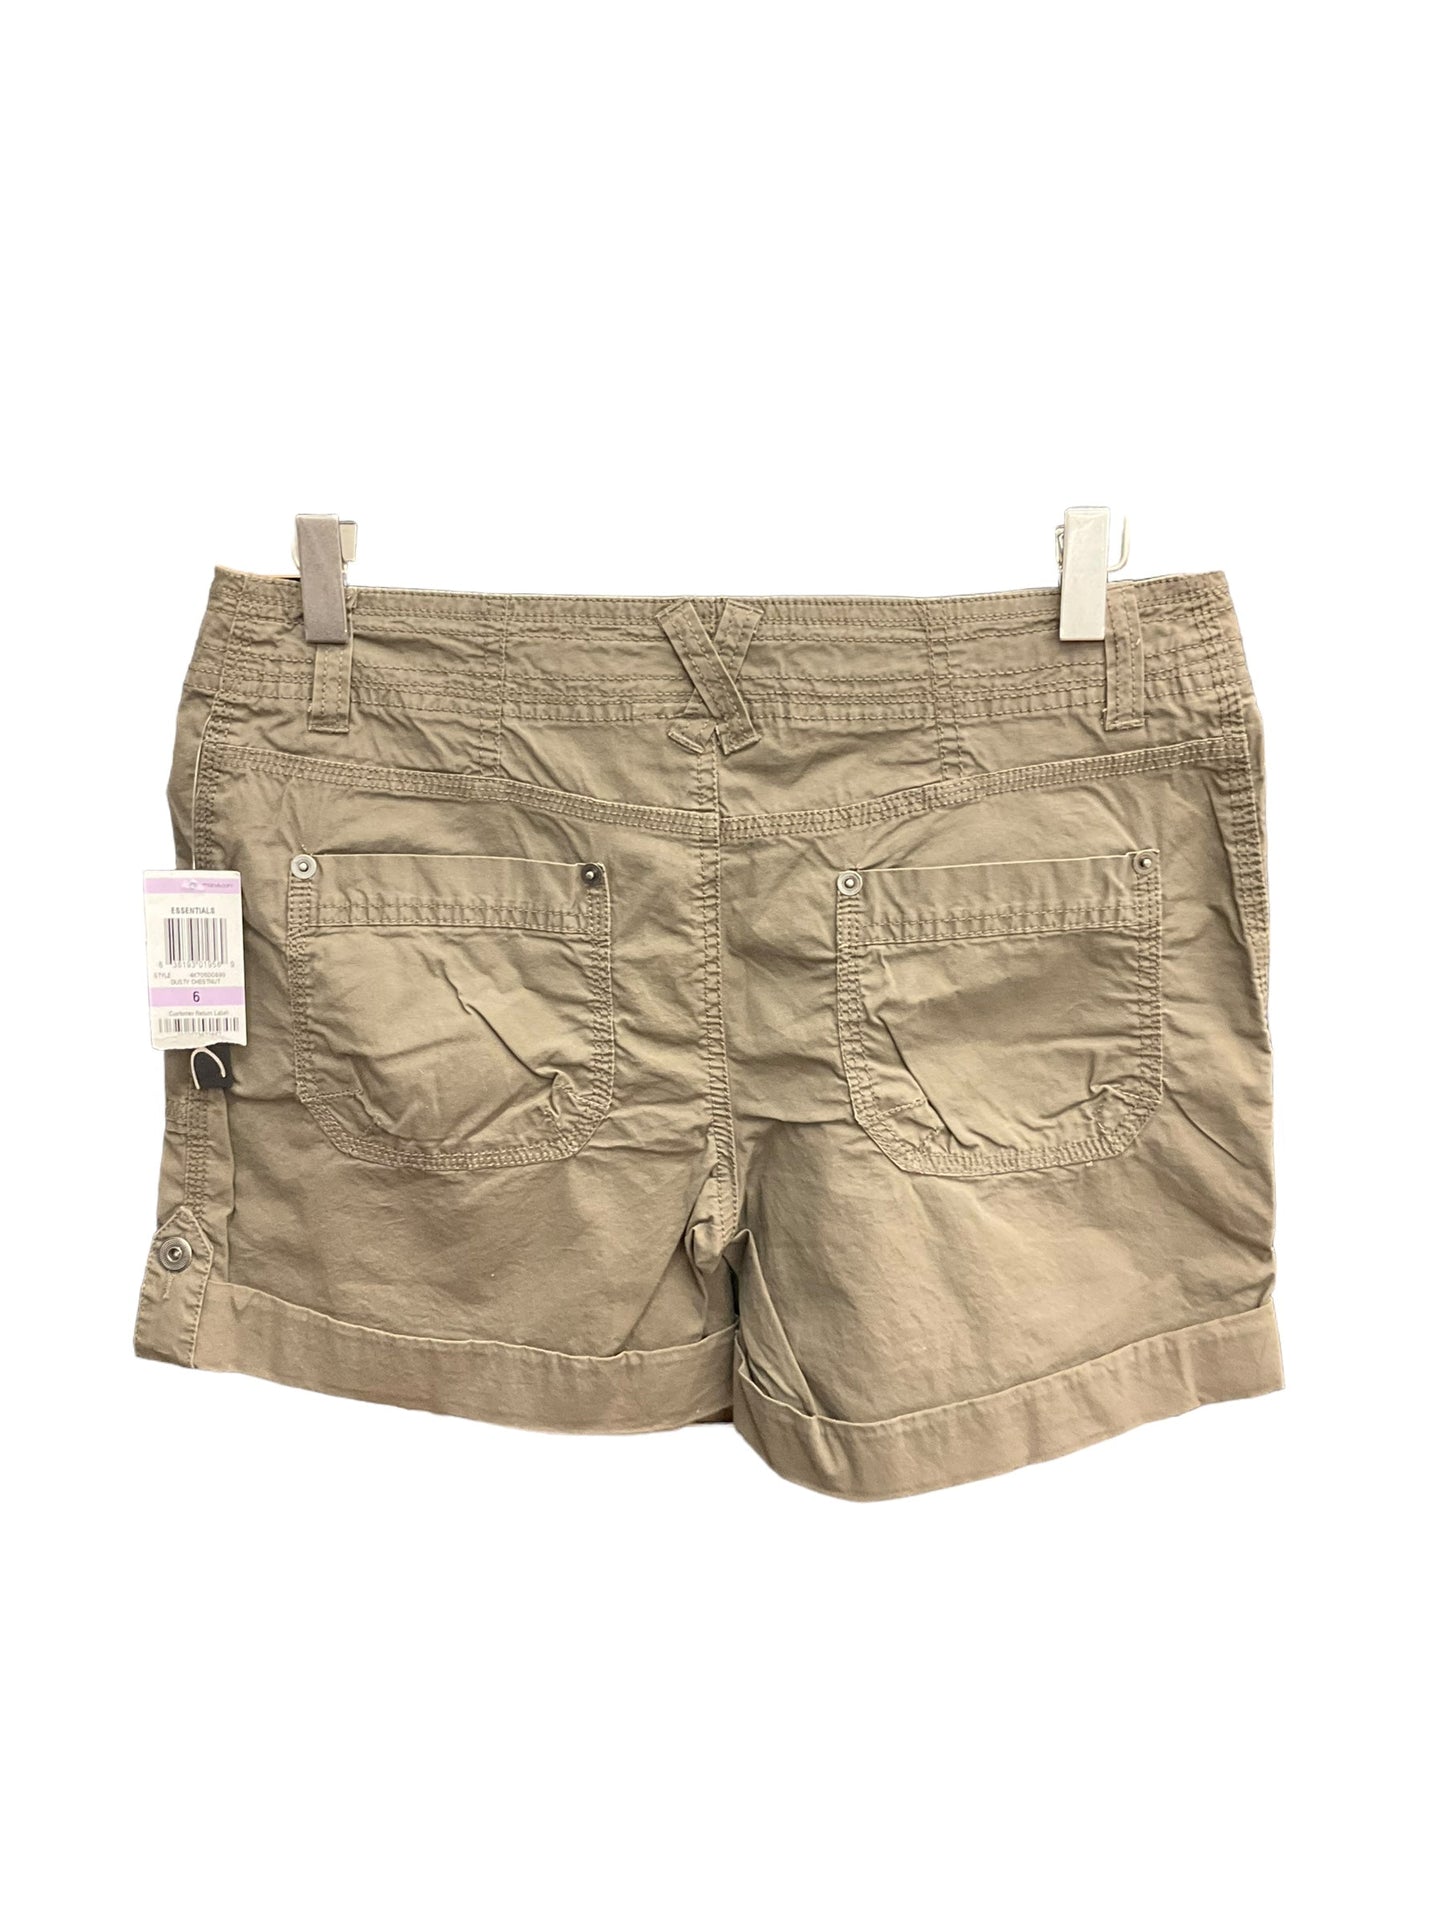 Brown Shorts International Concepts, Size 6